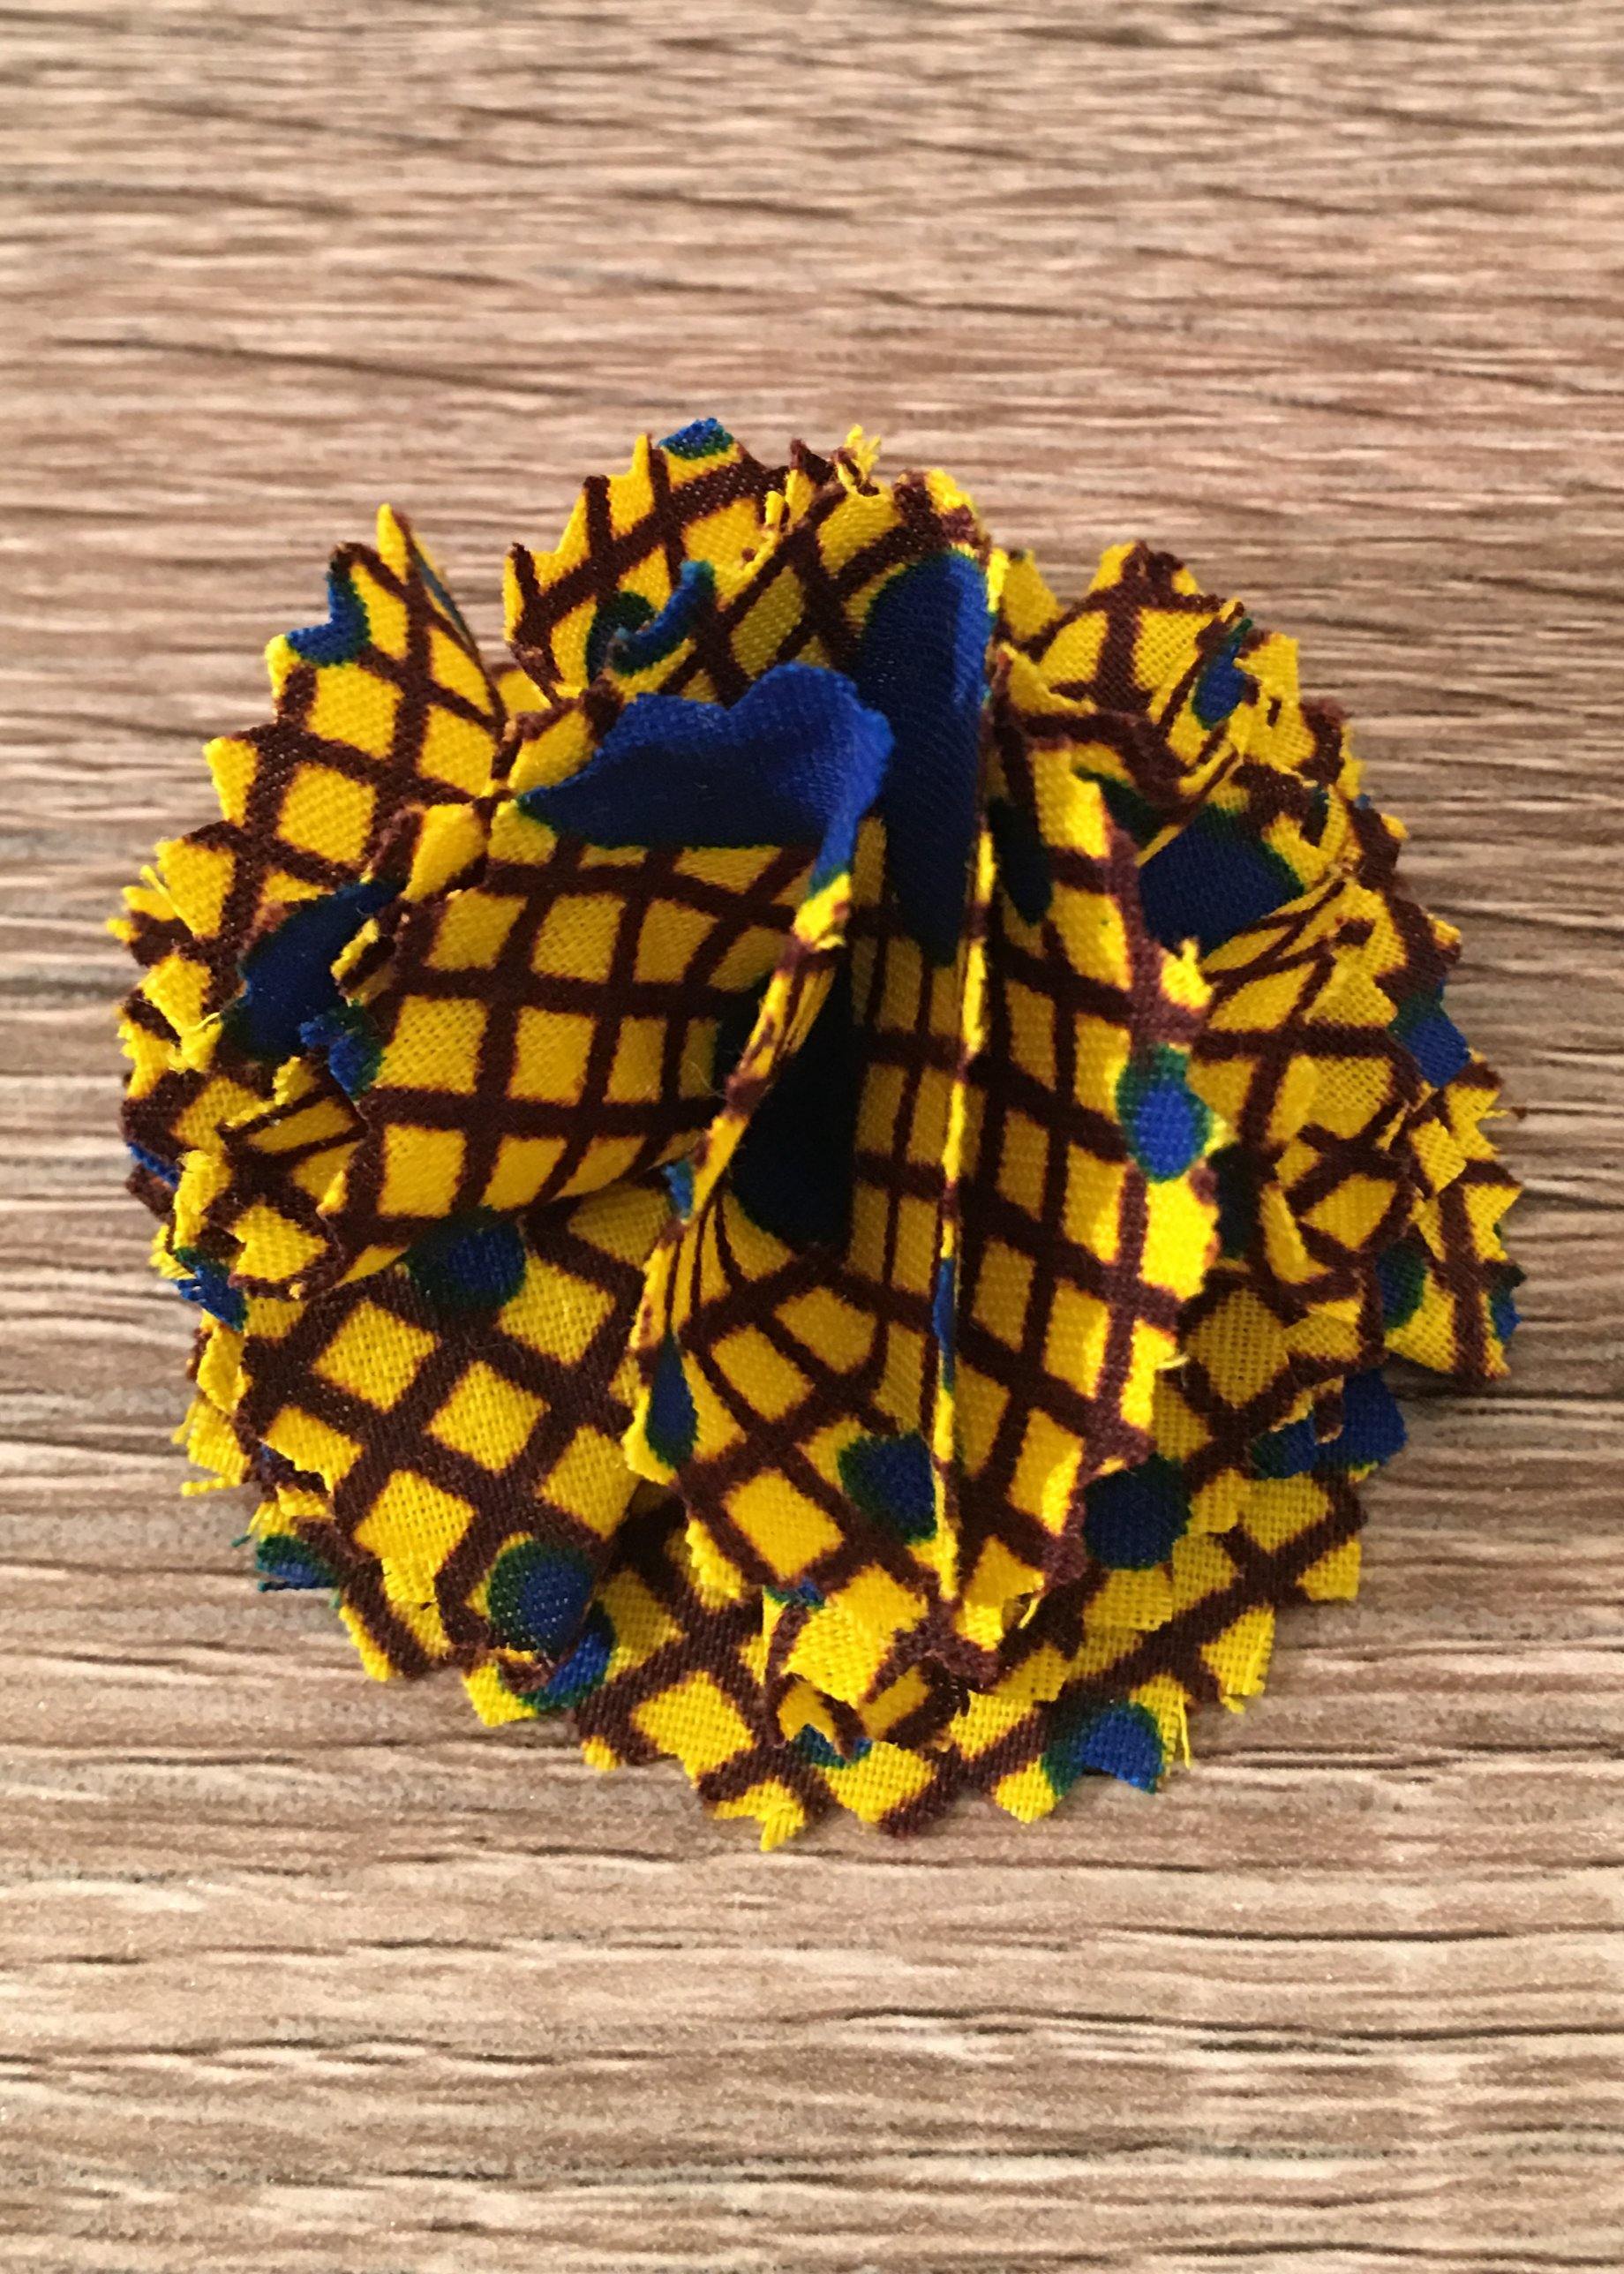 Lapel Pins in African Print -Contemporary and Colorful Ensemble-African apparel and accessories